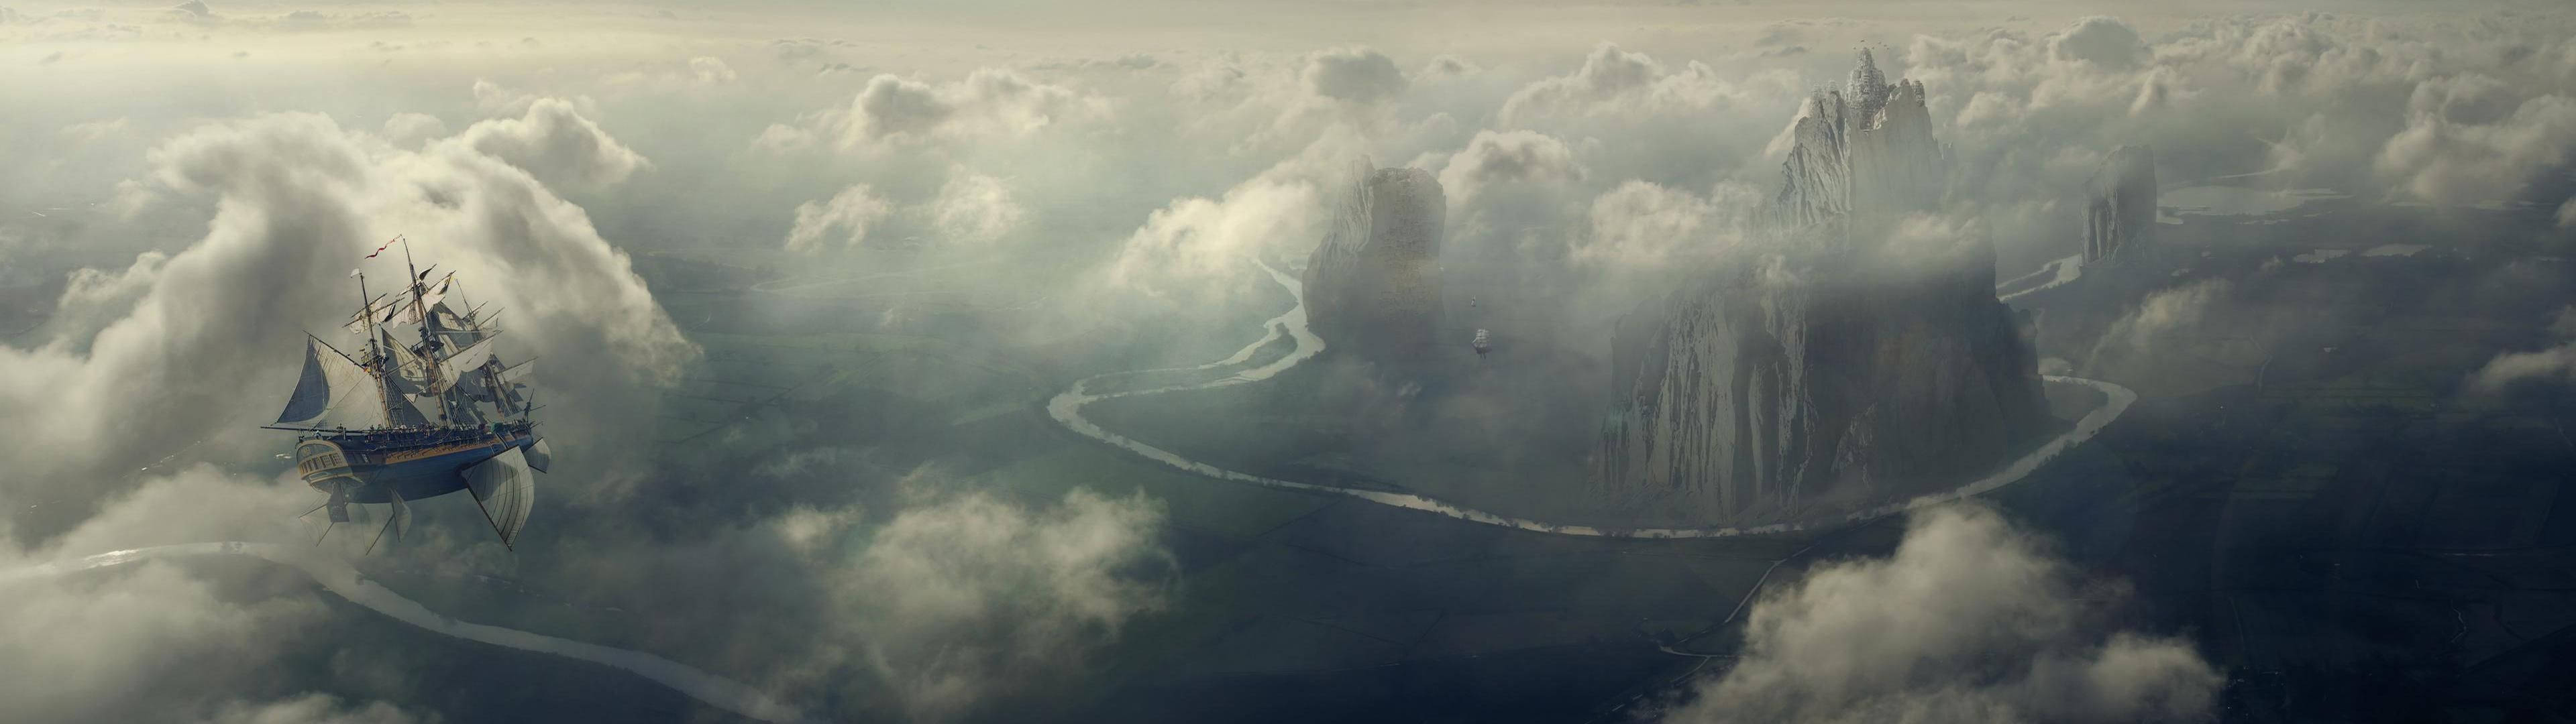 An Epic View Of A Ship Floating Amidst Clouds In The Sky Background